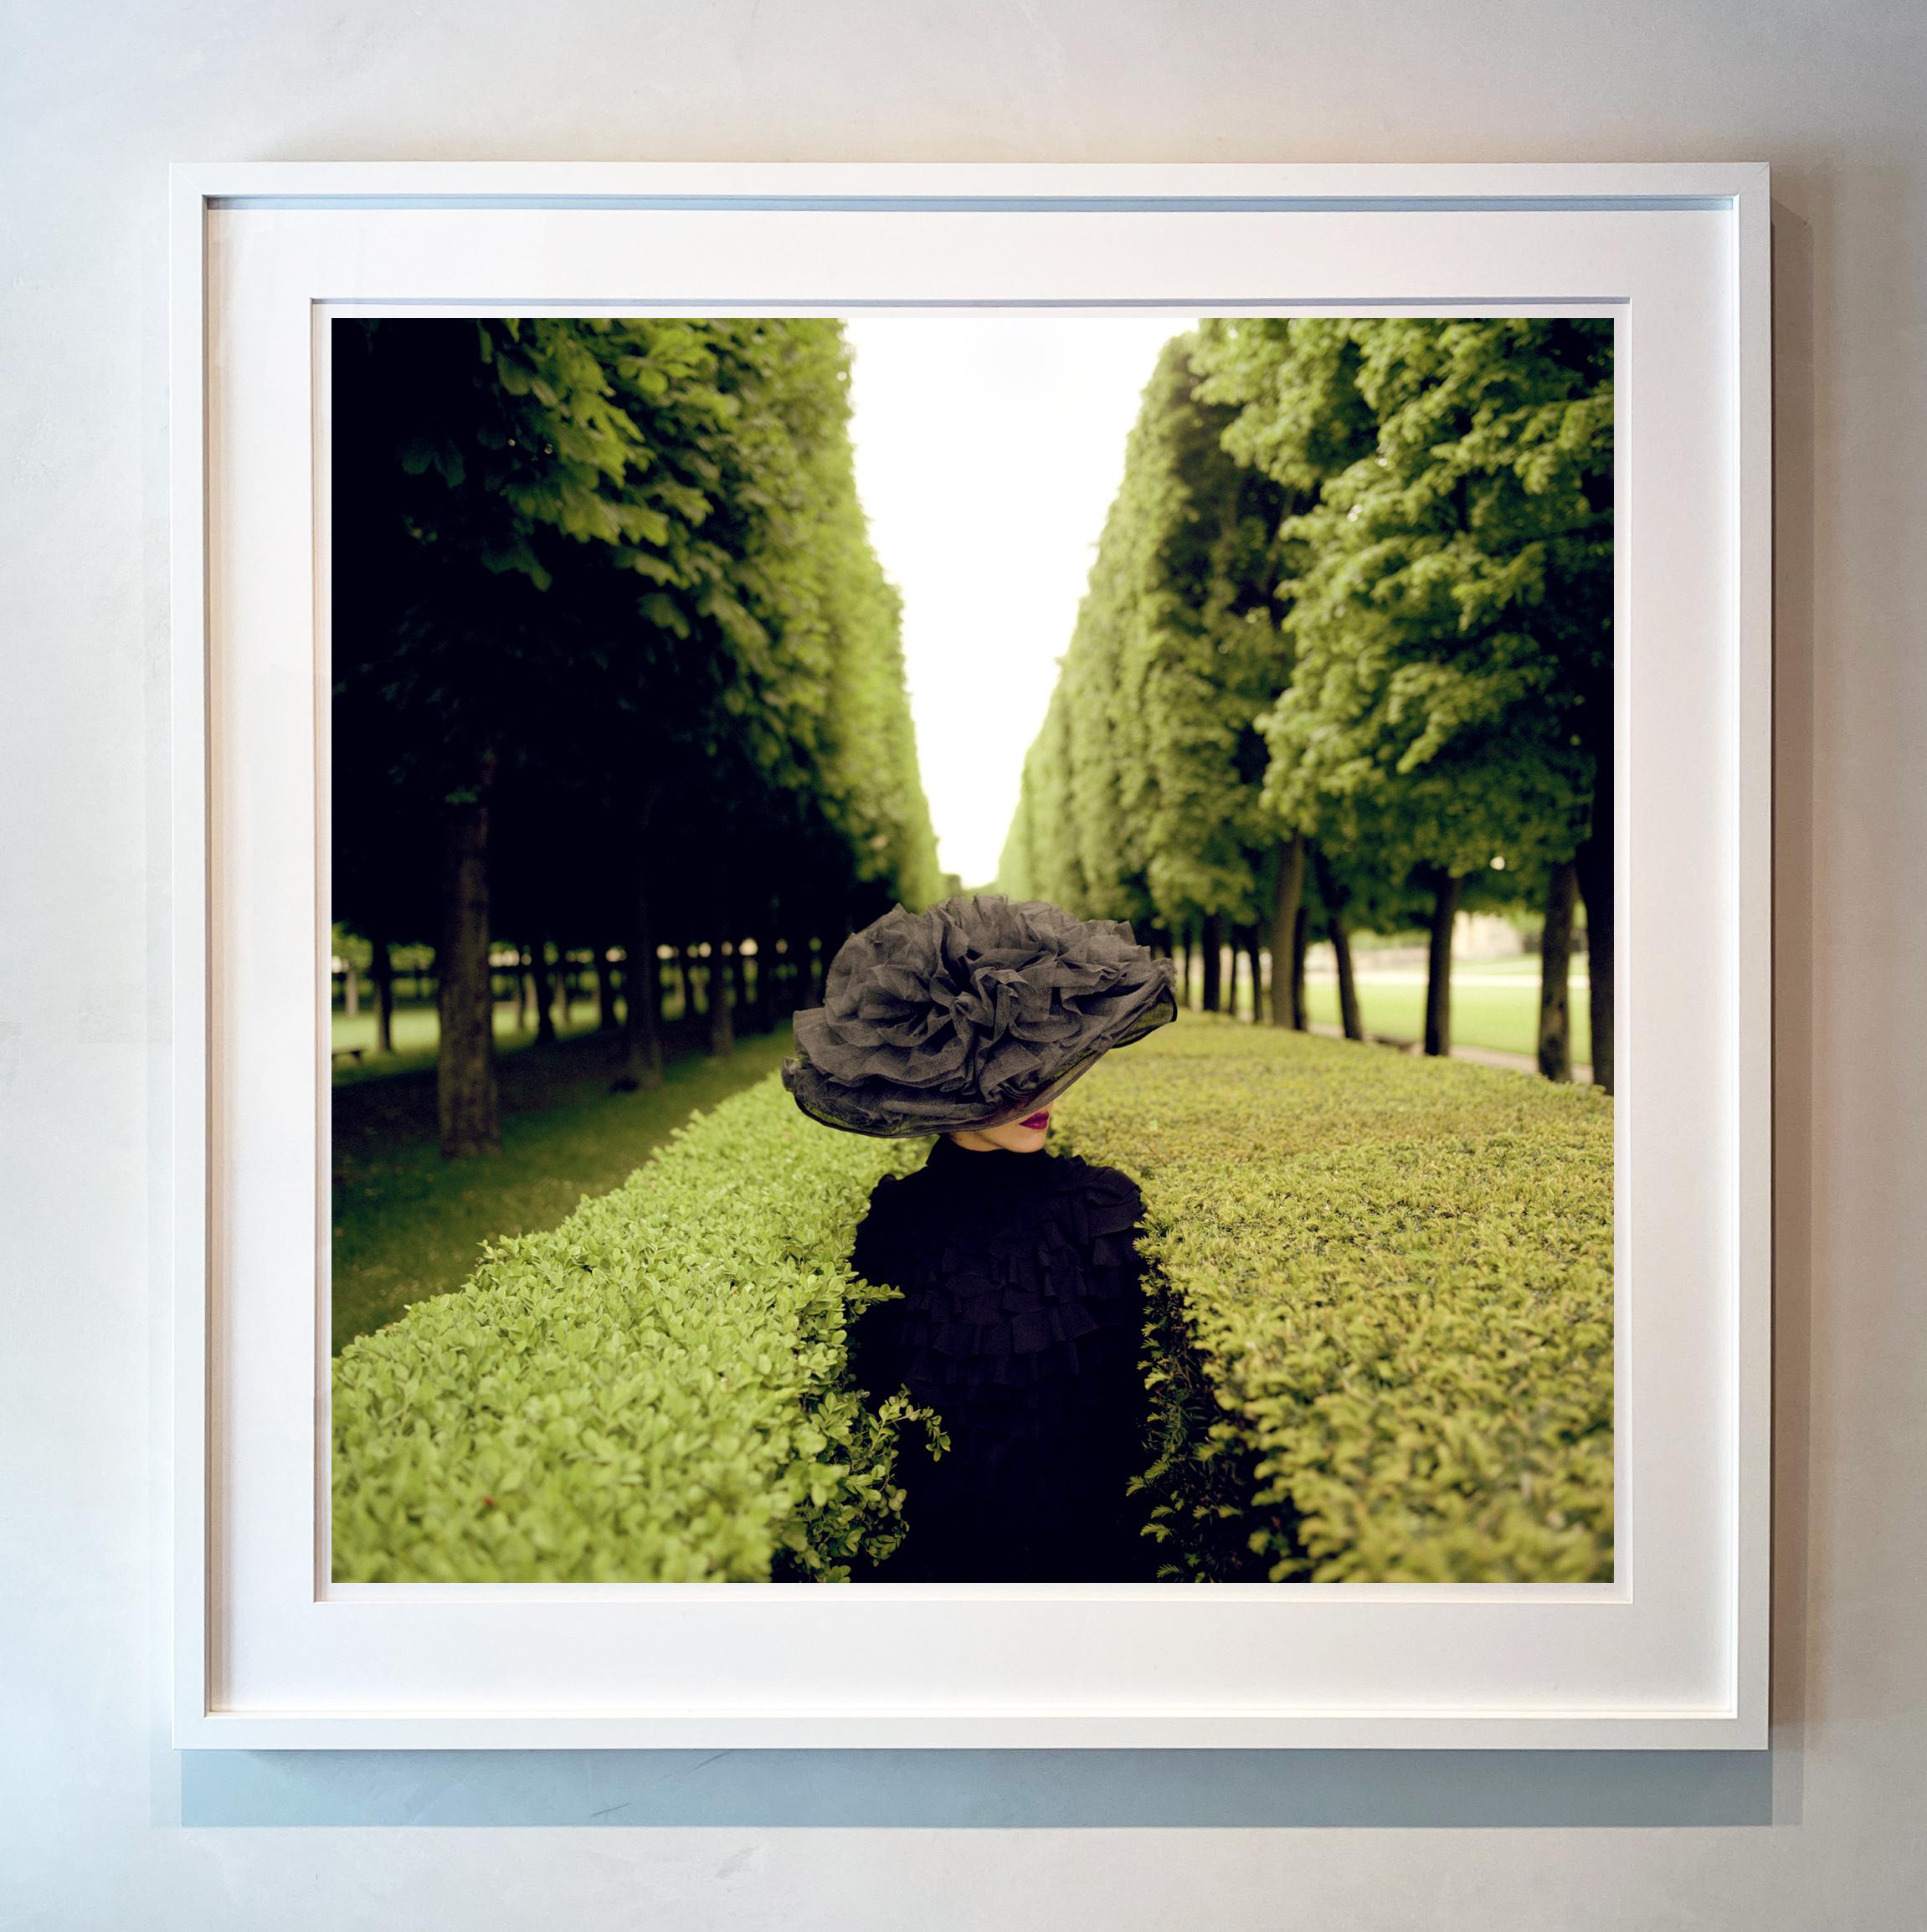 Woman with Hat Between Hedges, Parc de Sceaux, France - 50 x 50 inches framed - Contemporary Photograph by Rodney Smith